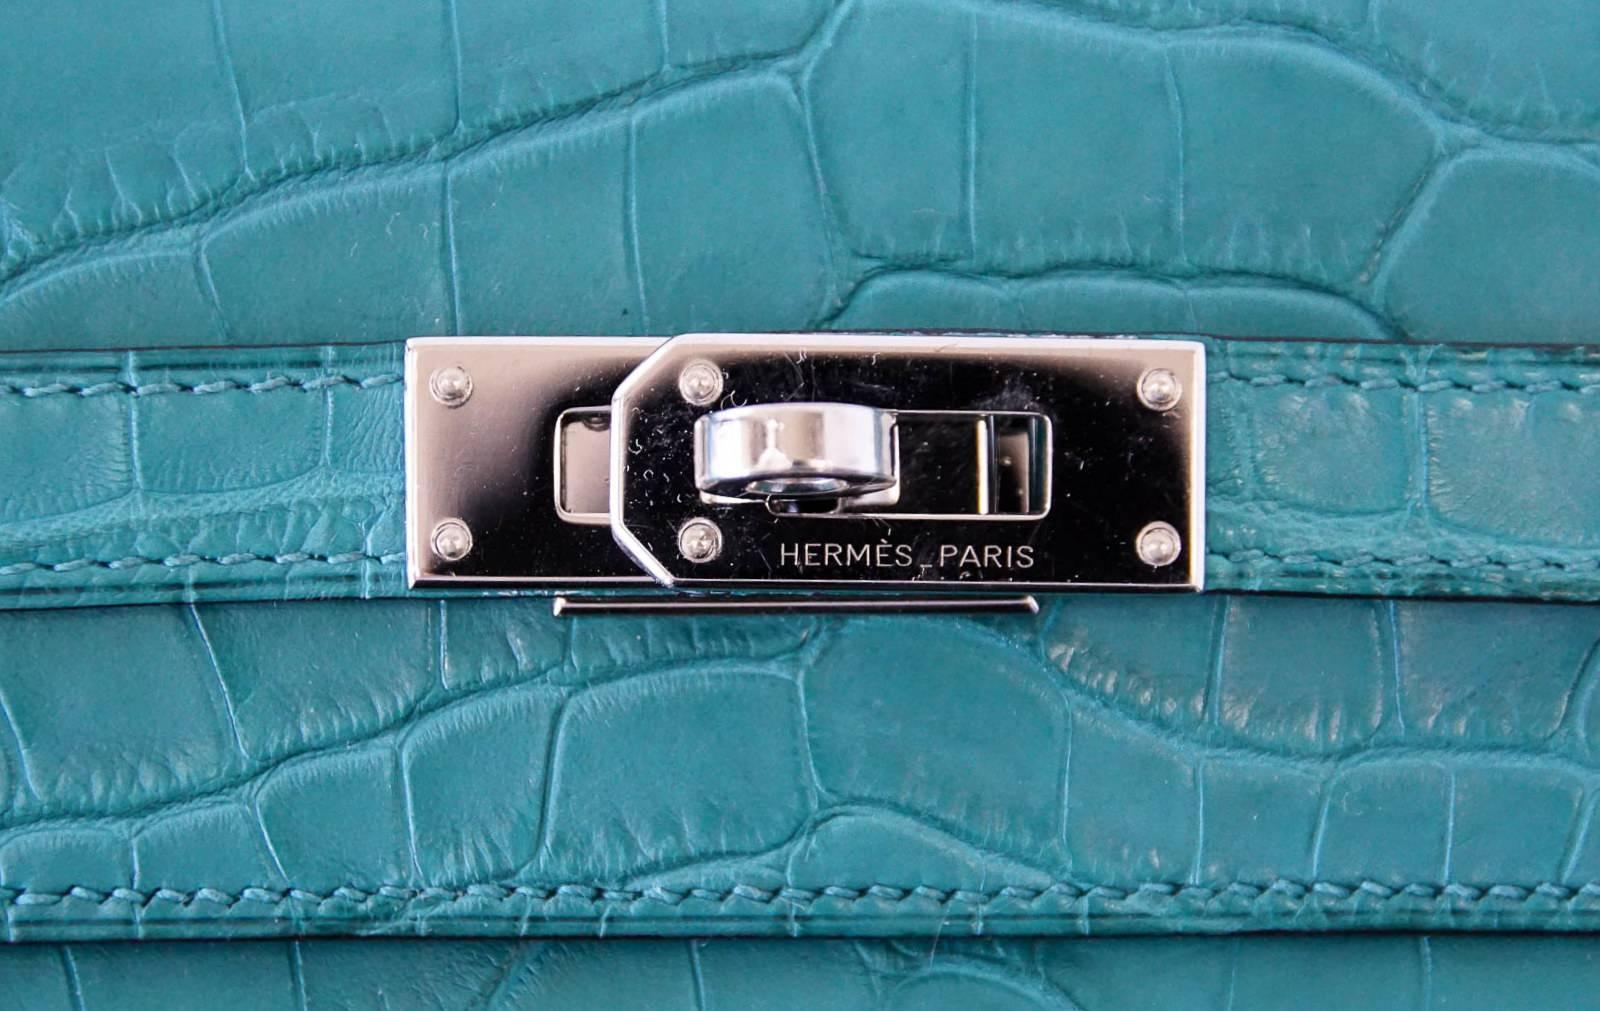 Guaranteed authentic timeless matte Alligator Hermes Kelly Long Wallet.
Often carried as a clutch this Blue Paon beauty is a jewel in your hand.
The perfect pop of rich colour for any outfit.
Palladium hardware.
Carried only 2 or 3 times in perfect